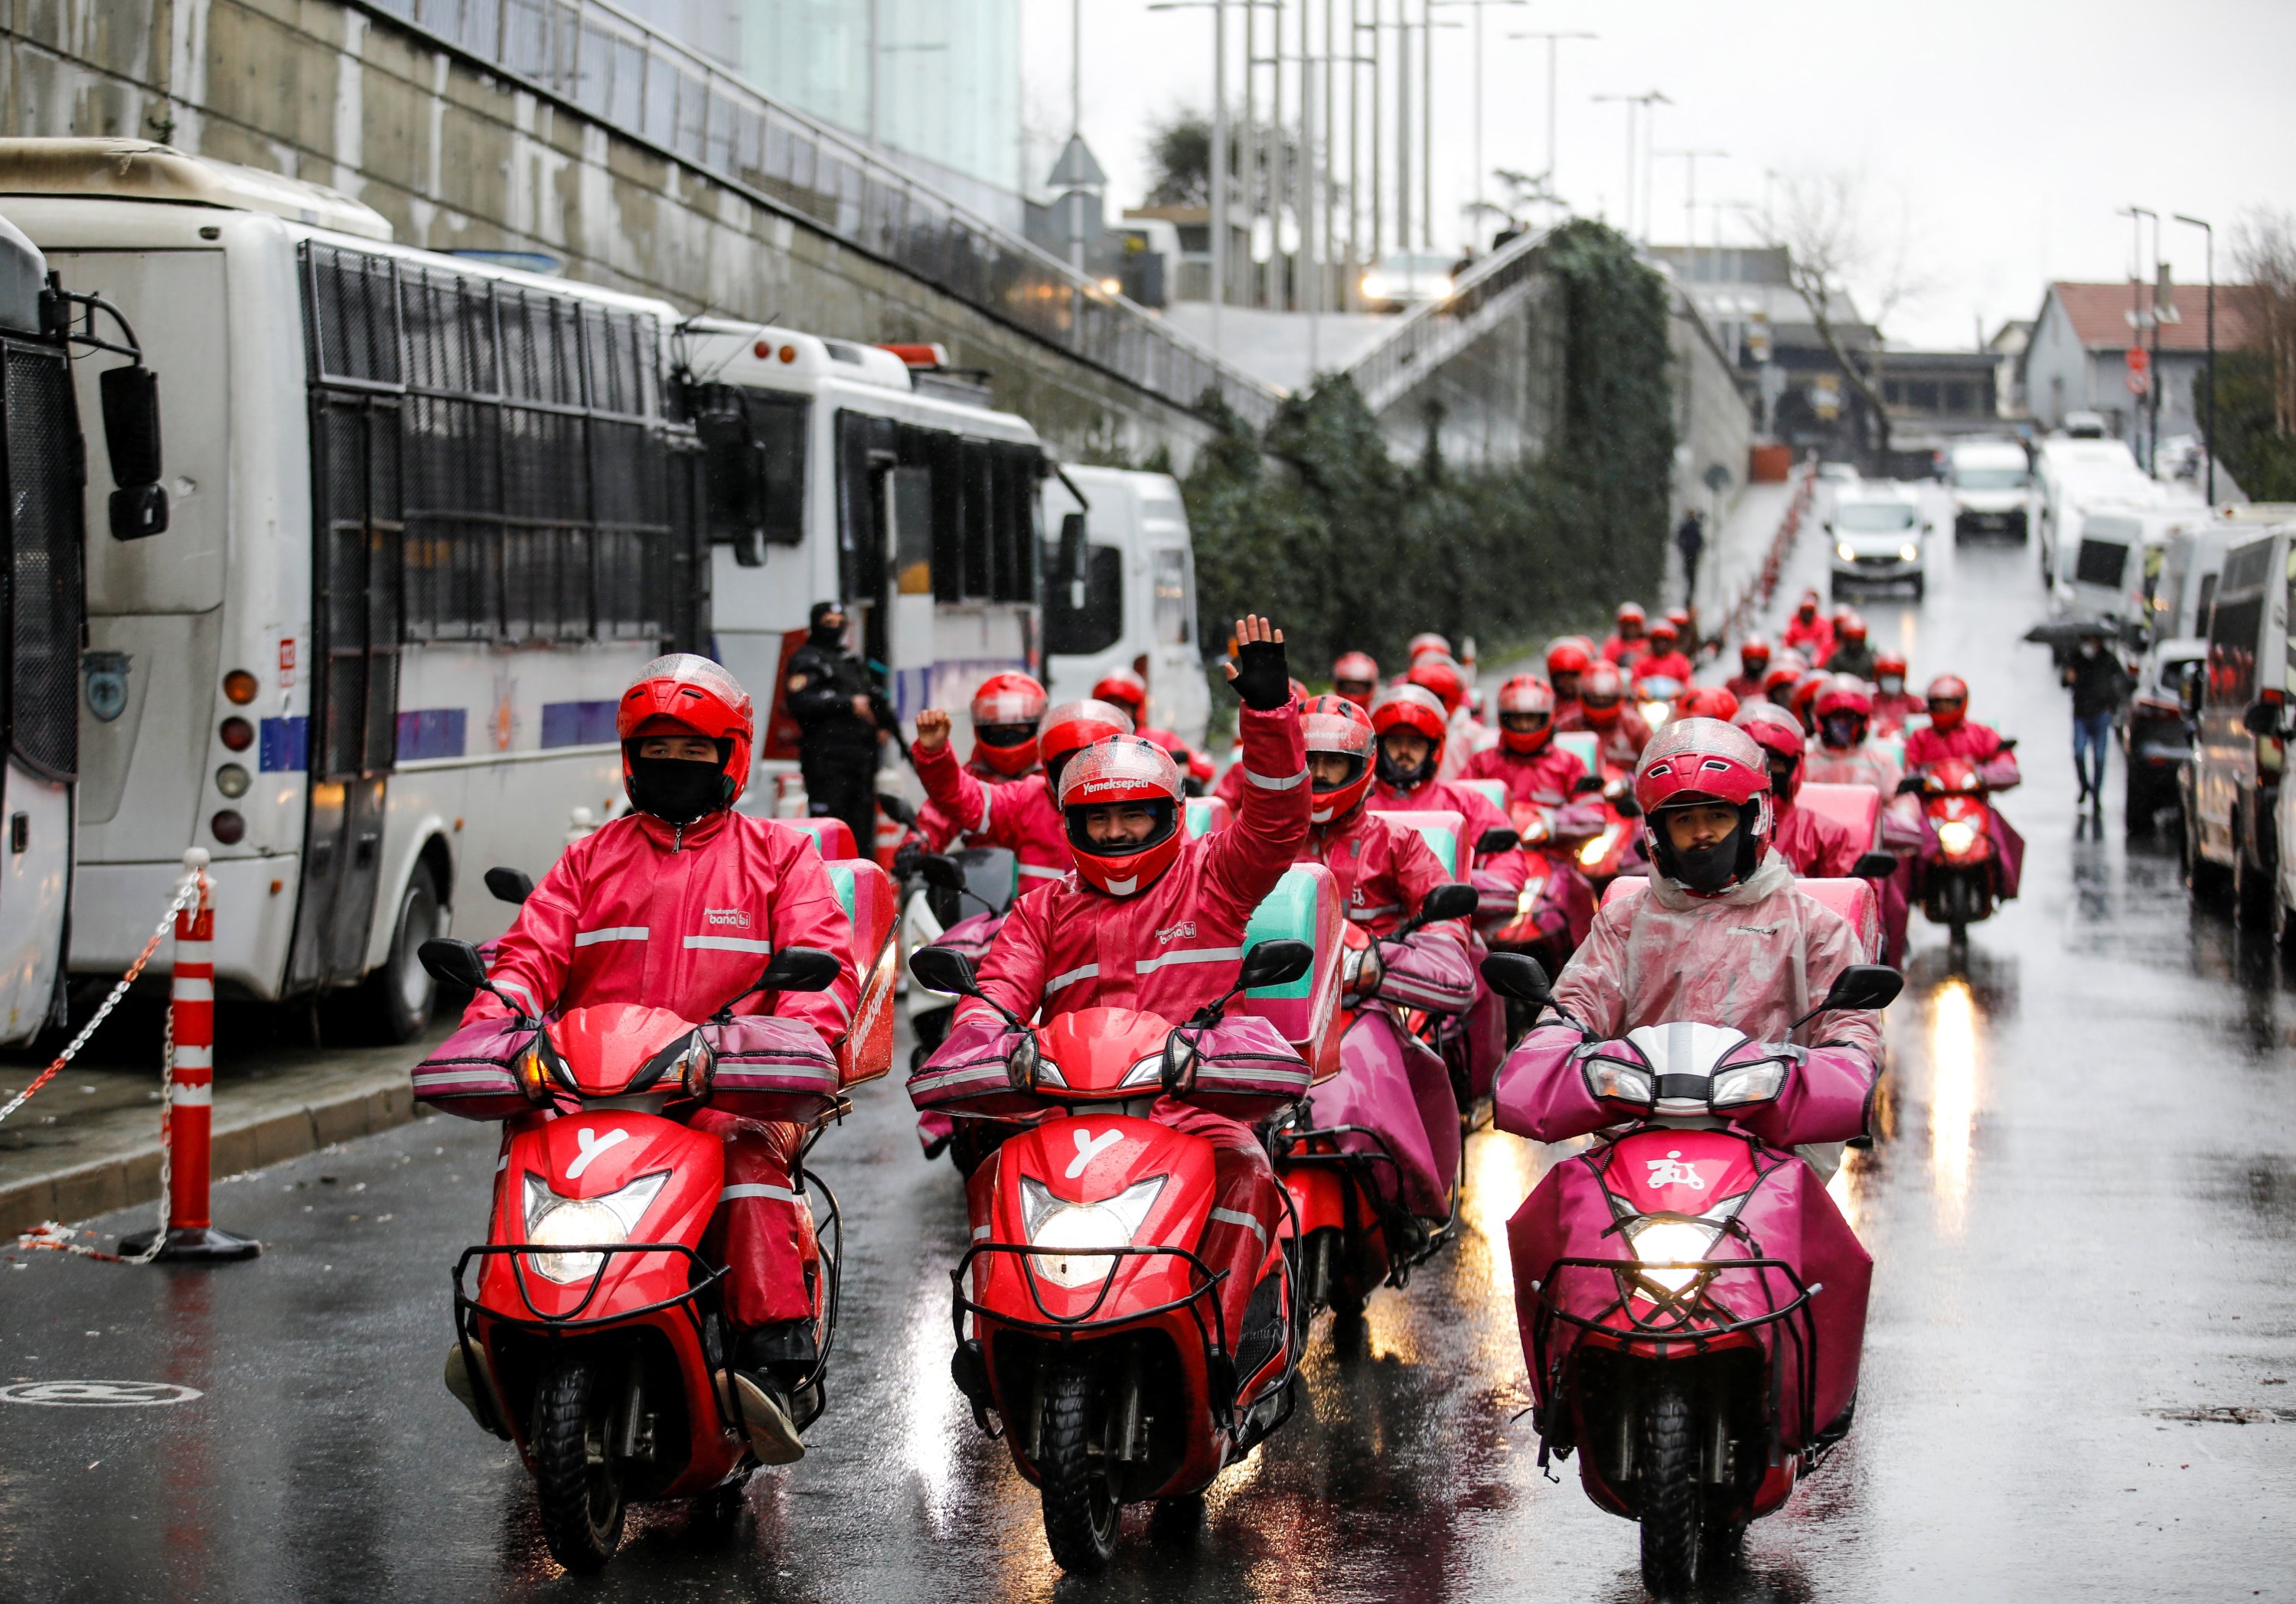 Delivery couriers of Yemeksepeti on strike shout slogans on their scooters during a demonstration to demand higher wages in front of the company headquarters in Istanbul, Turkey Feb. 3, 2022. (Reuters Photo)